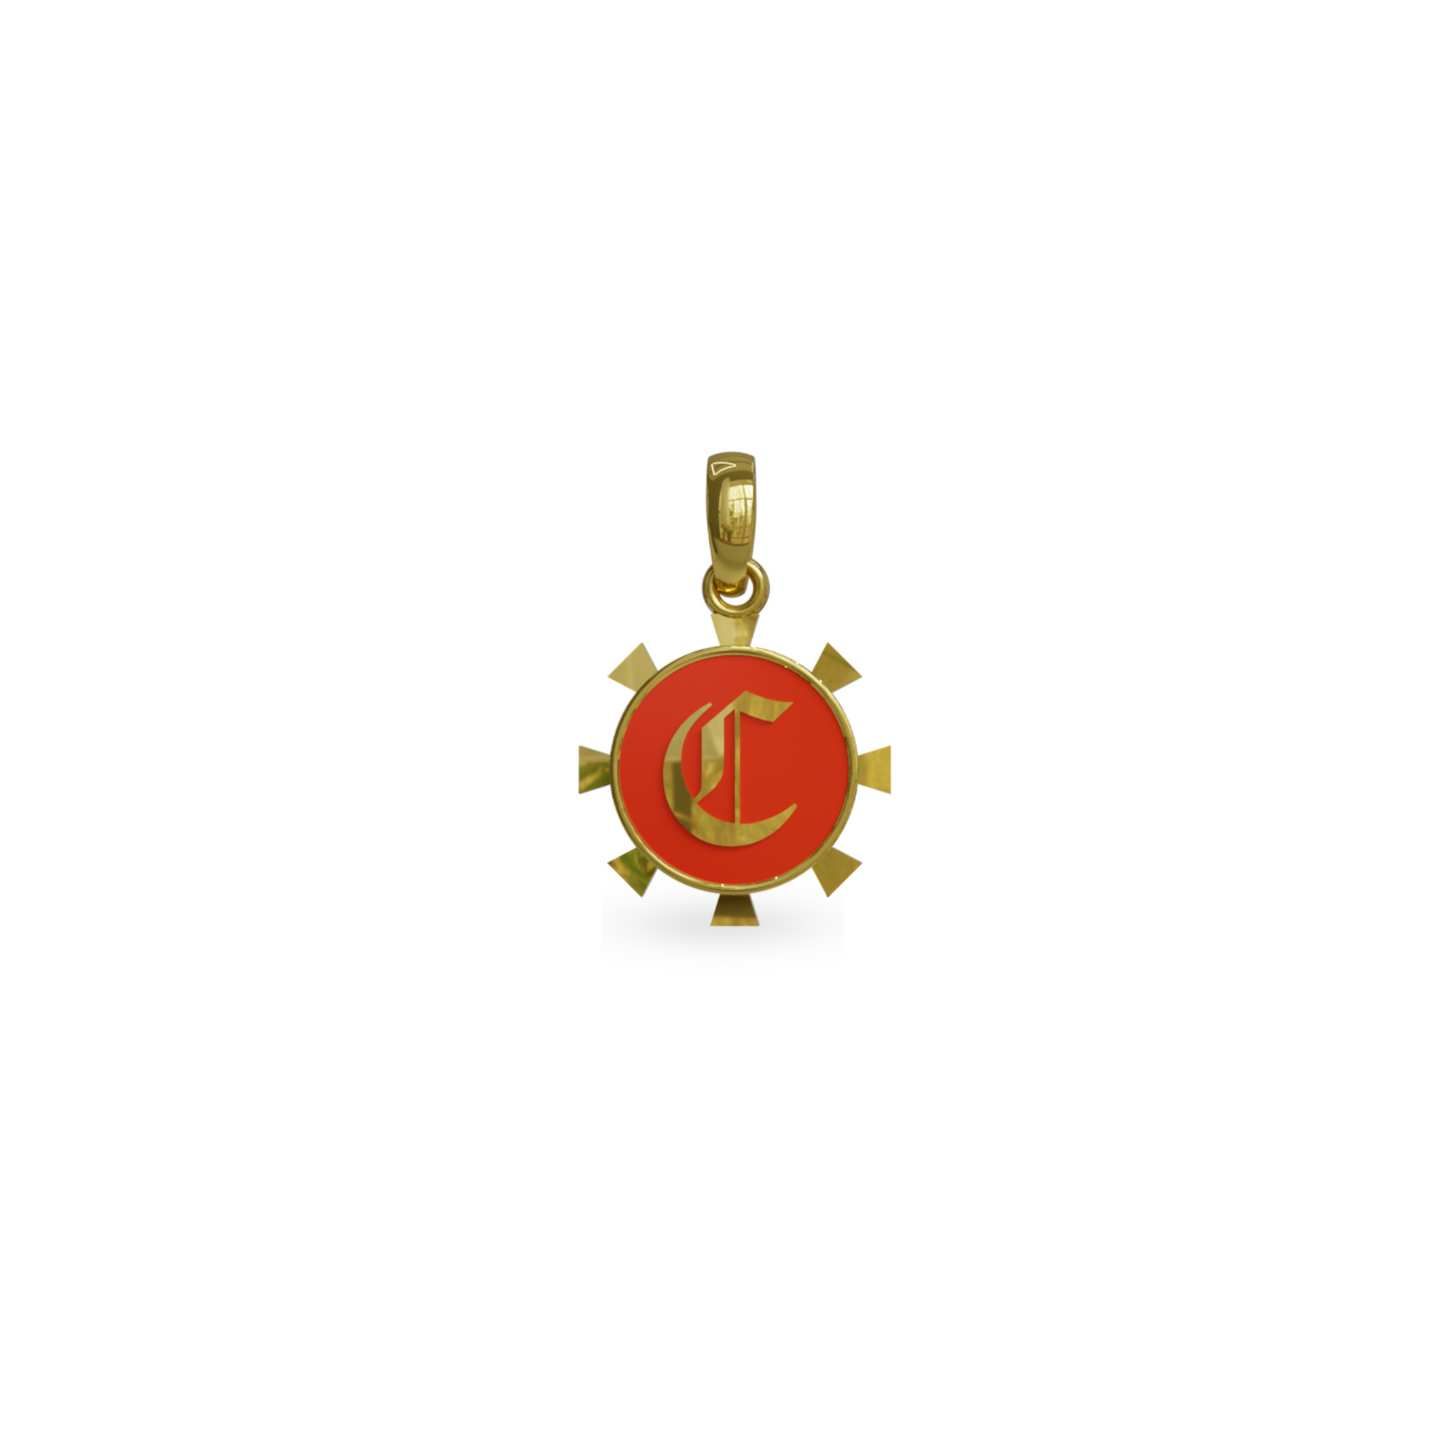 Mini Vessel Charm with Old English Initial